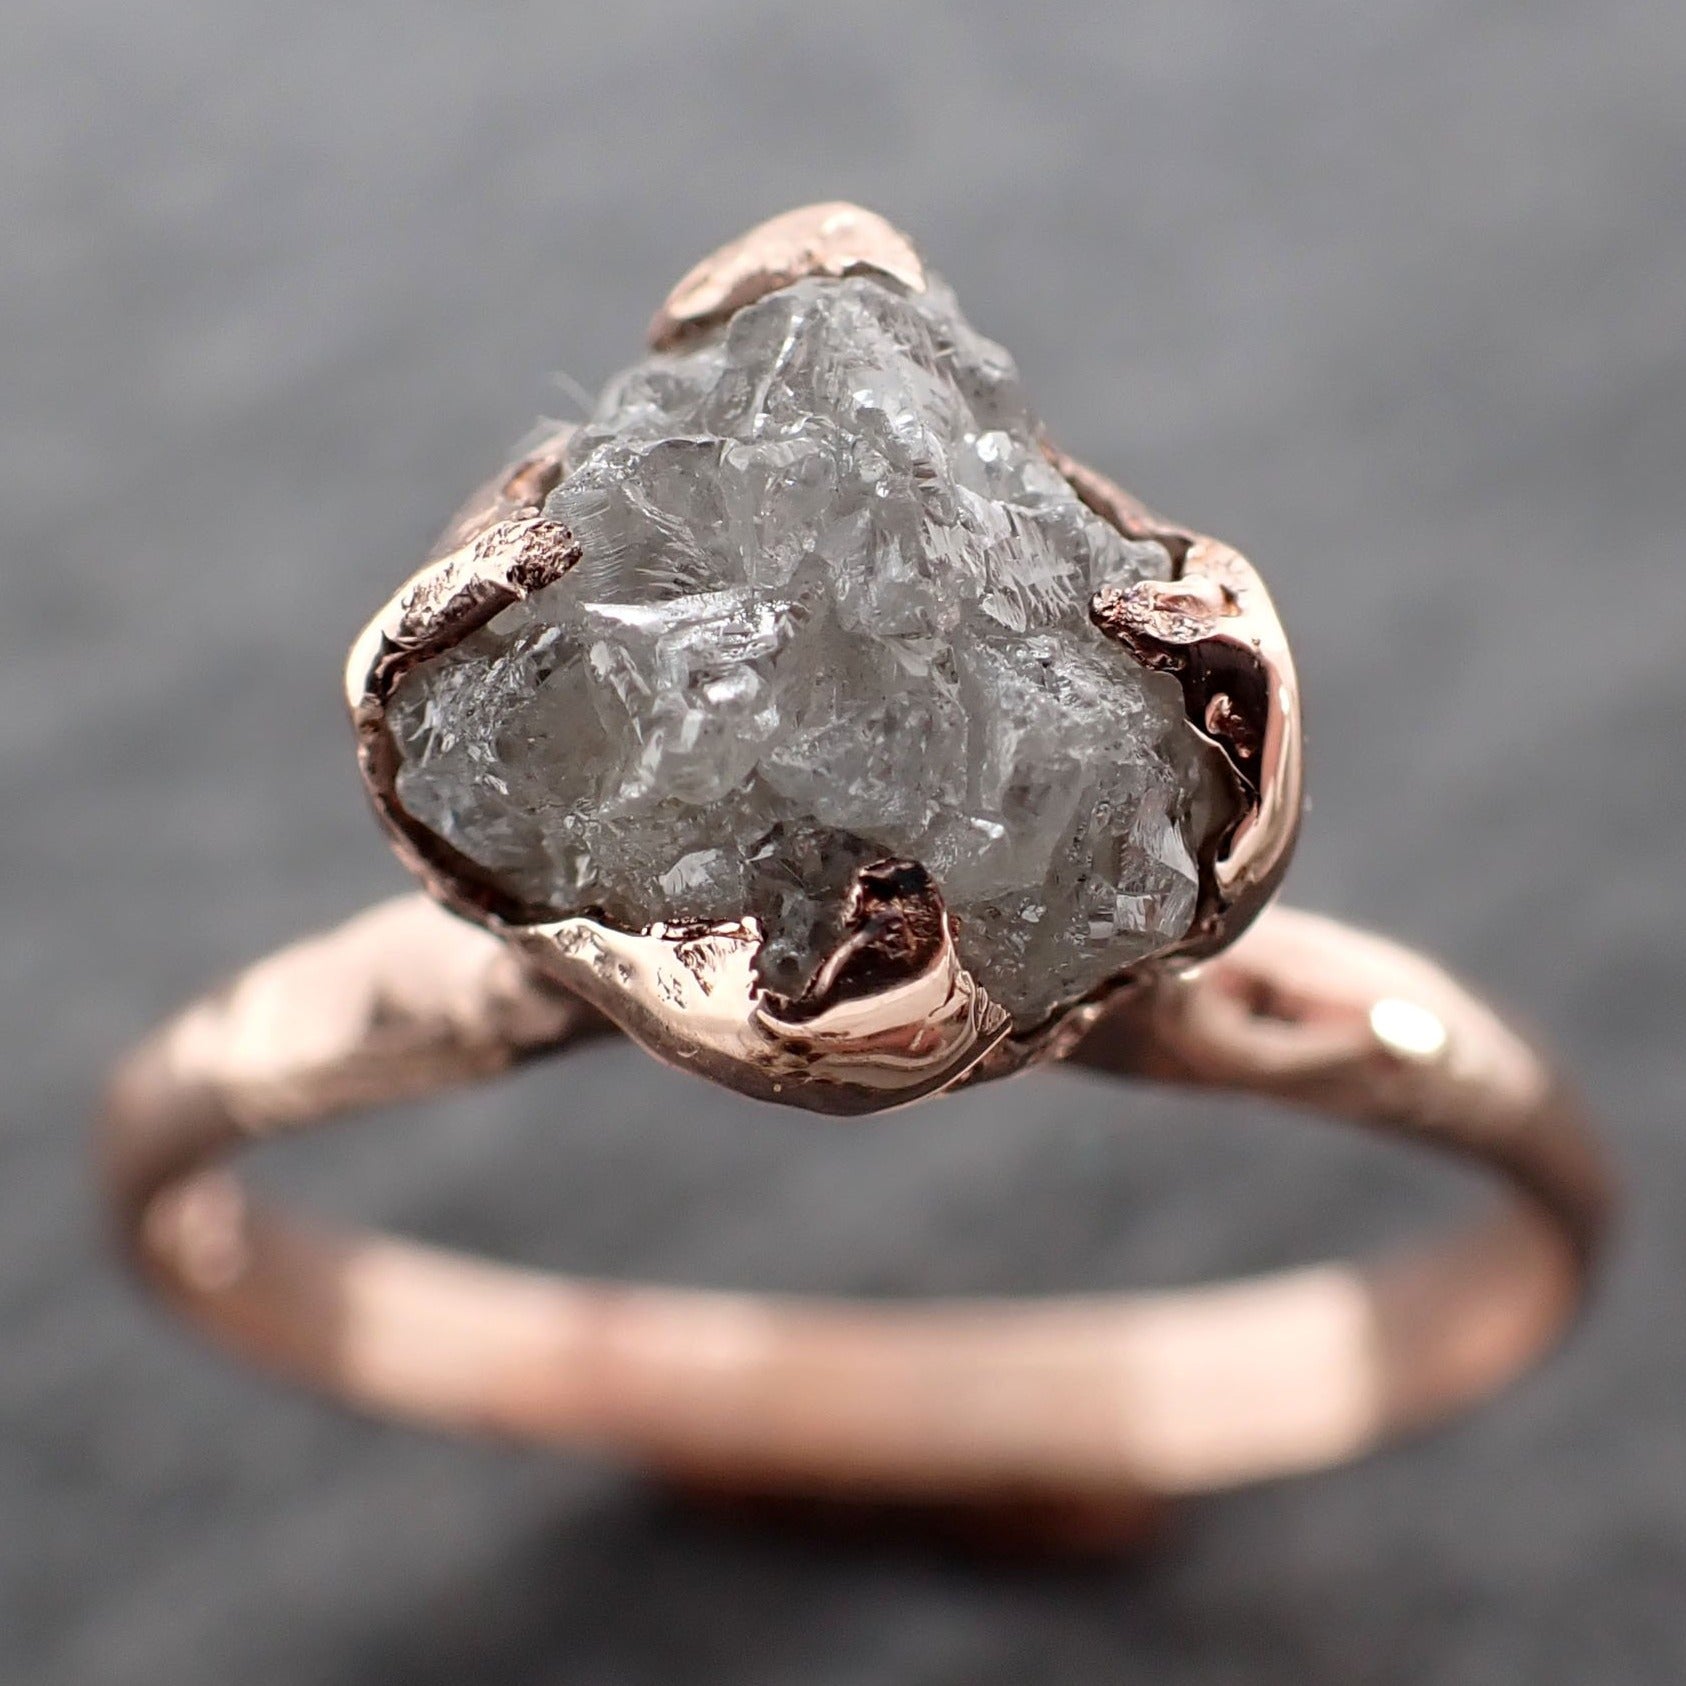 raw diamond solitaire engagement ring rough uncut rose gold conflict free diamond wedding promise 2547 Alternative Engagement